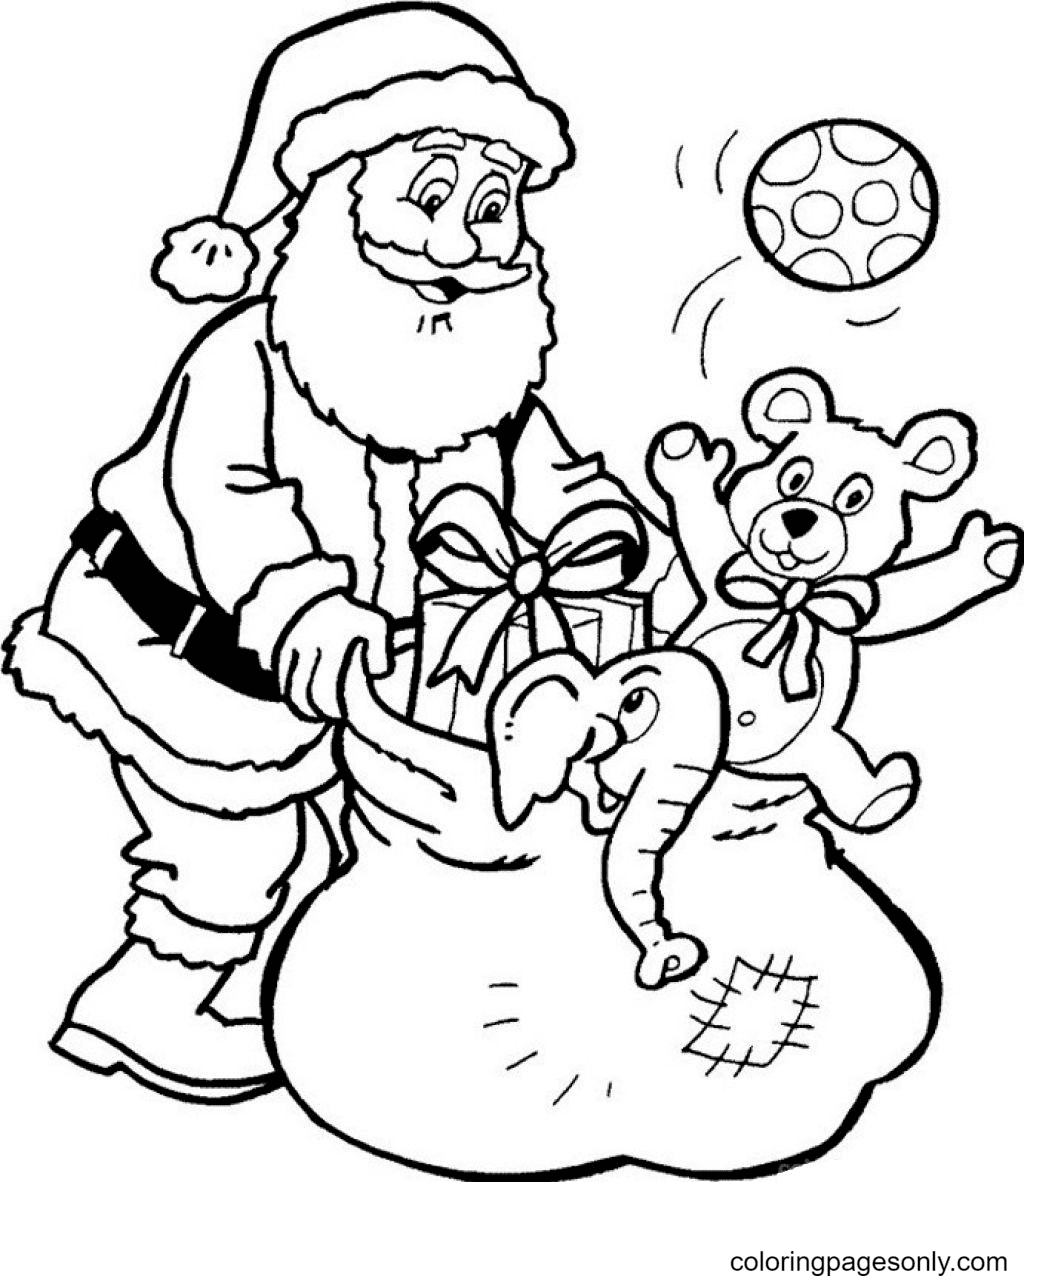 Santa Claus Collecting The Toys from Santa Claus